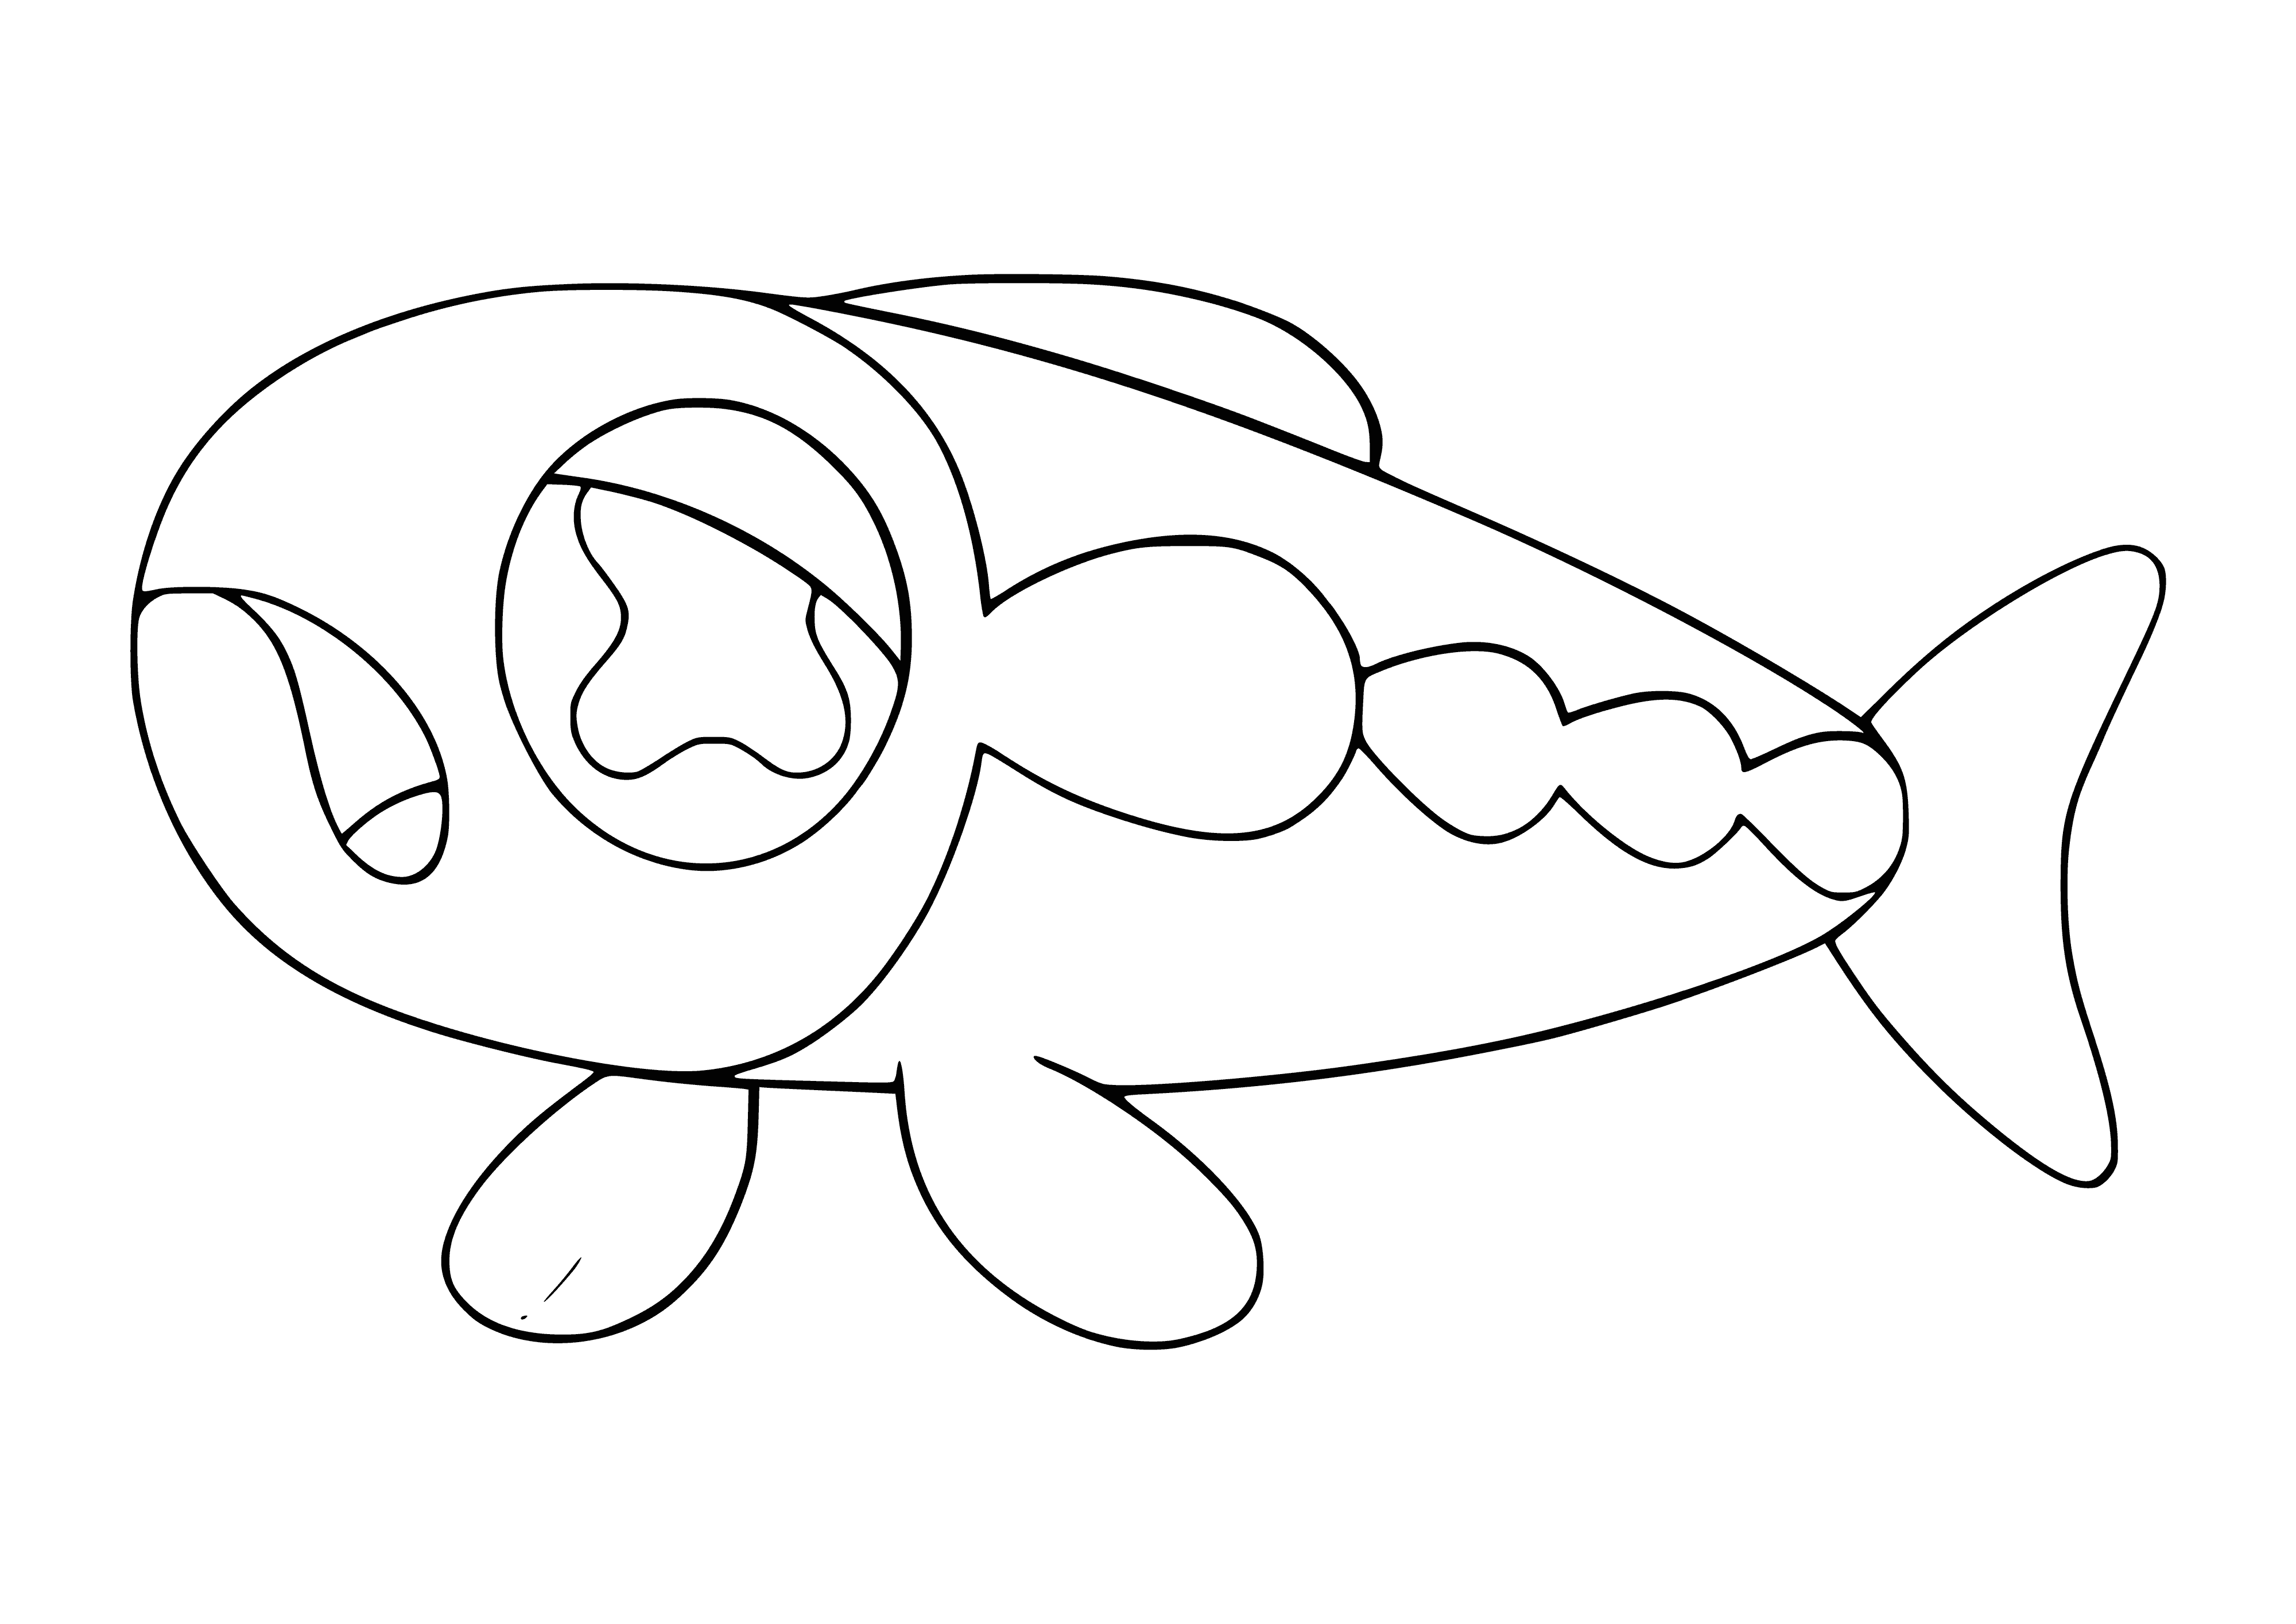 coloring page: Small, blue fish-like Pokemon with large tail fin, beady eyes & 2 small head fins.